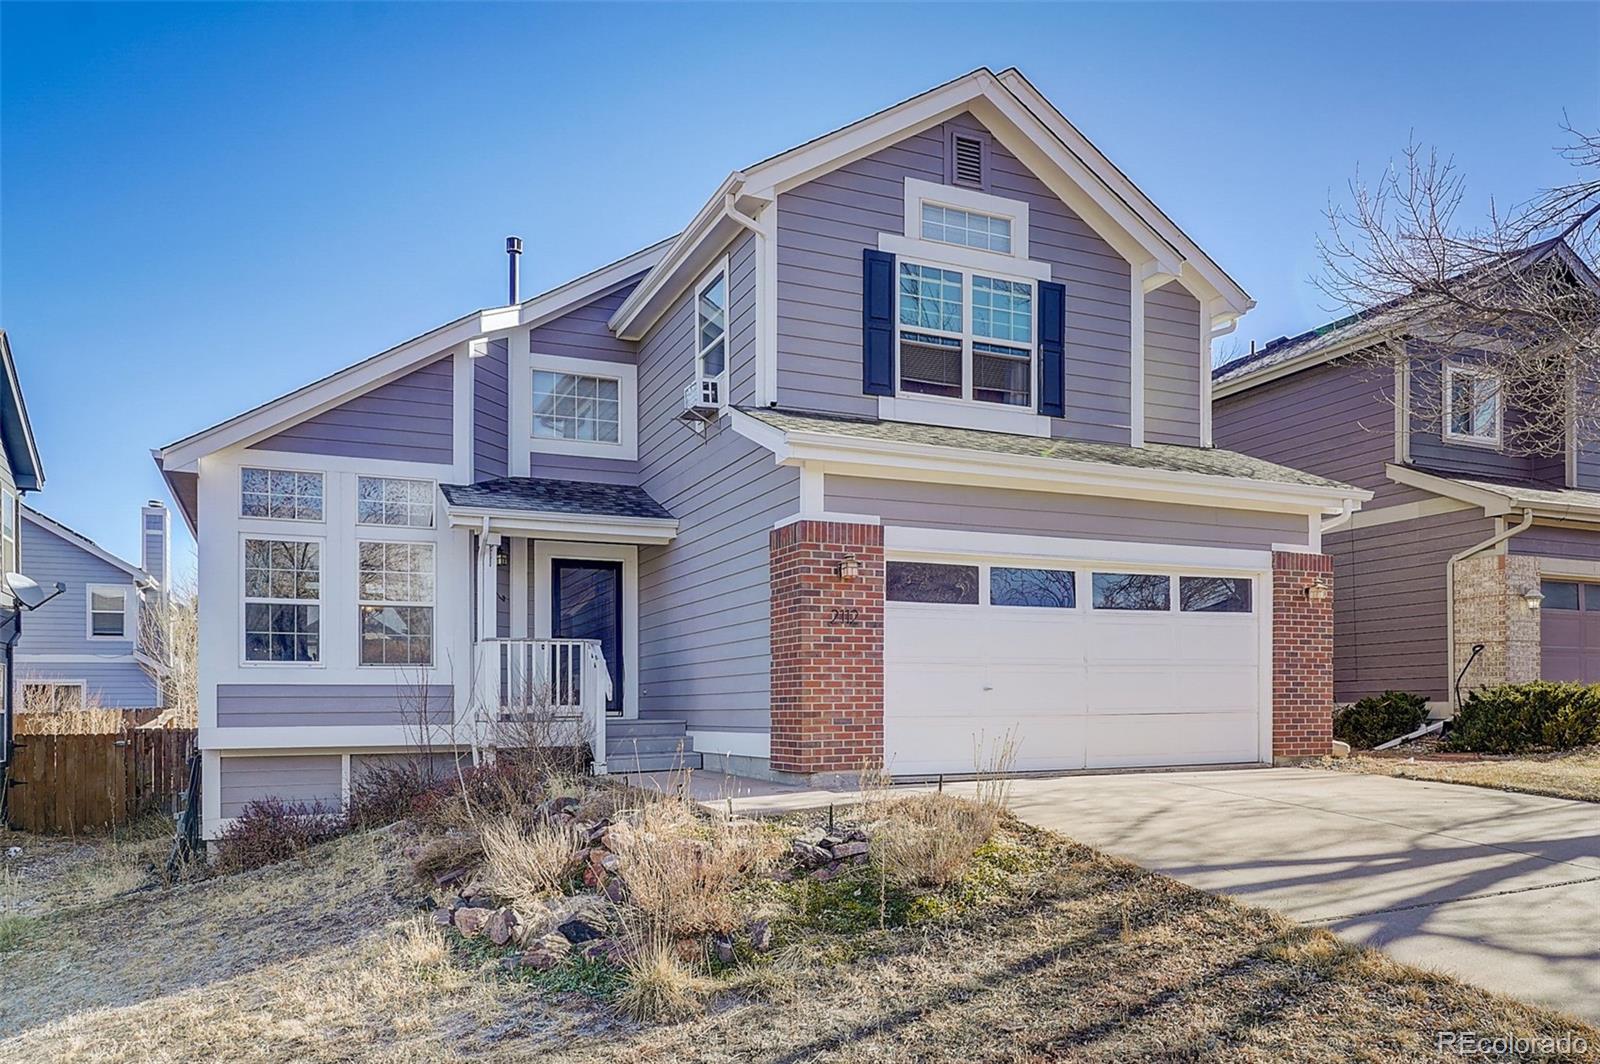 Report Image for 2112  Sable Chase Drive,Colorado Springs, Colorado